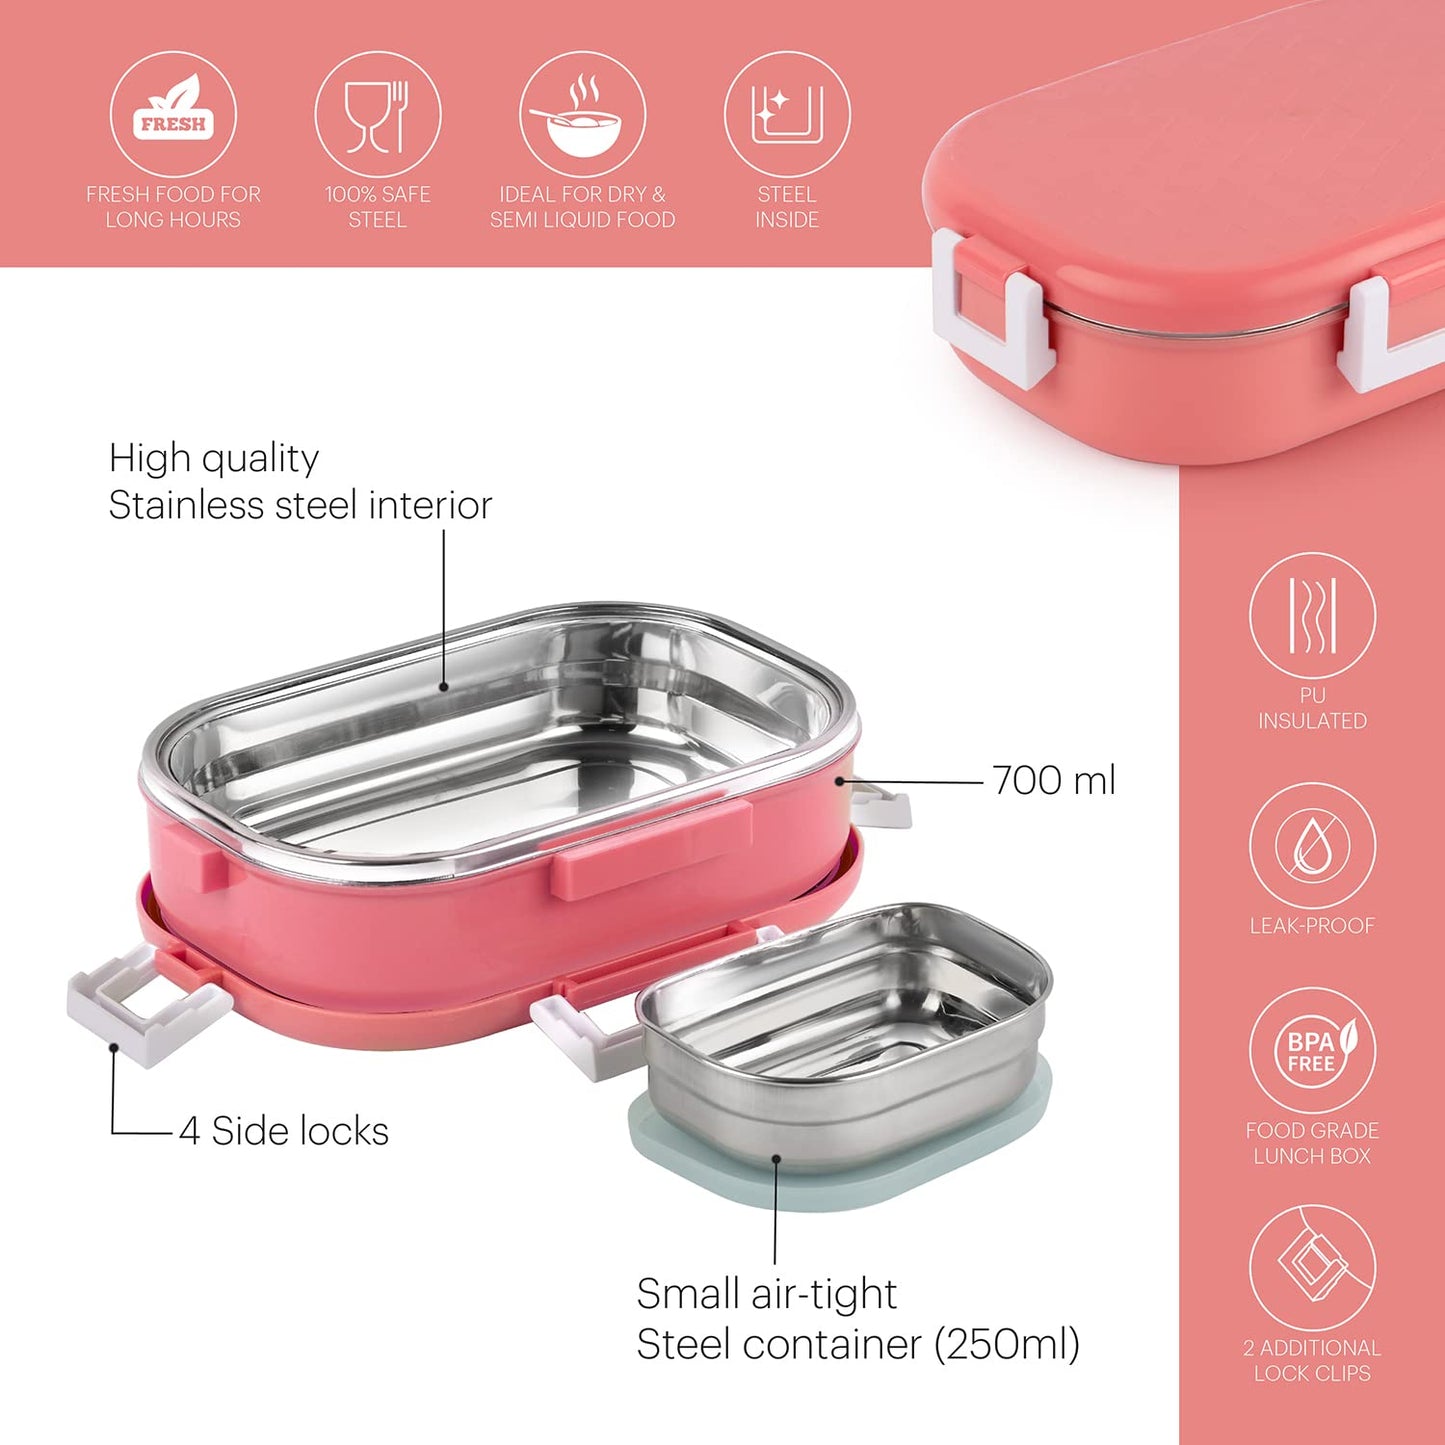 CELLO Altro Neo Lunch Box, Neo Pink, 700ml | 2 Units Insulated Lunch Boxes |Stainless Steel Lunch Box for Kids | Leak-Proof Snacks Tiffin Box for School